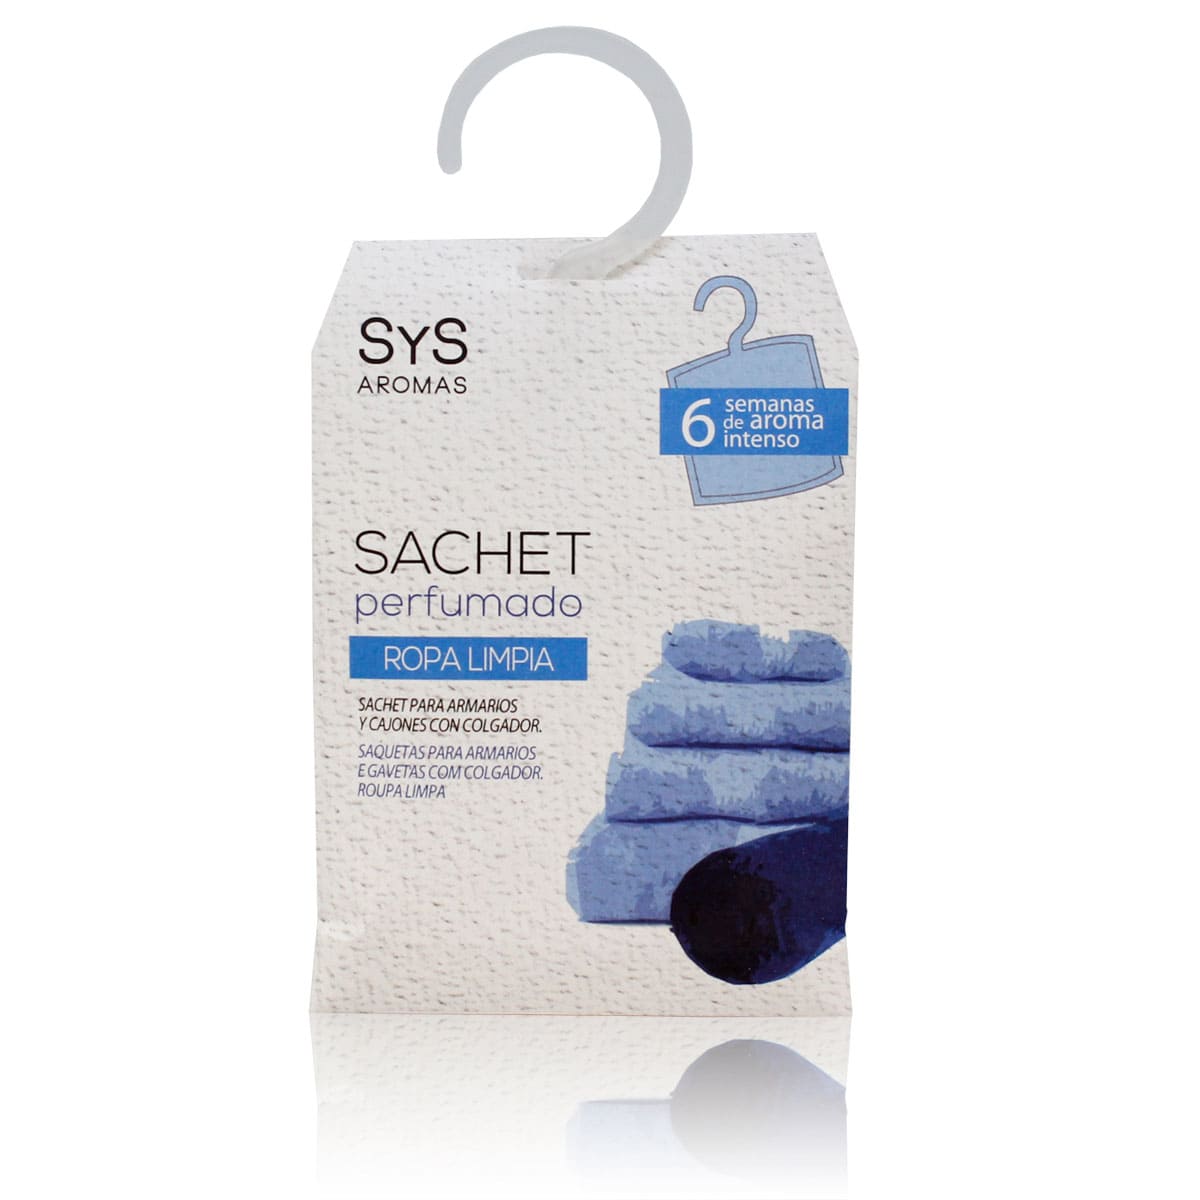 Buy Clean Clothes Scented Sachet 12g SYS Aromas